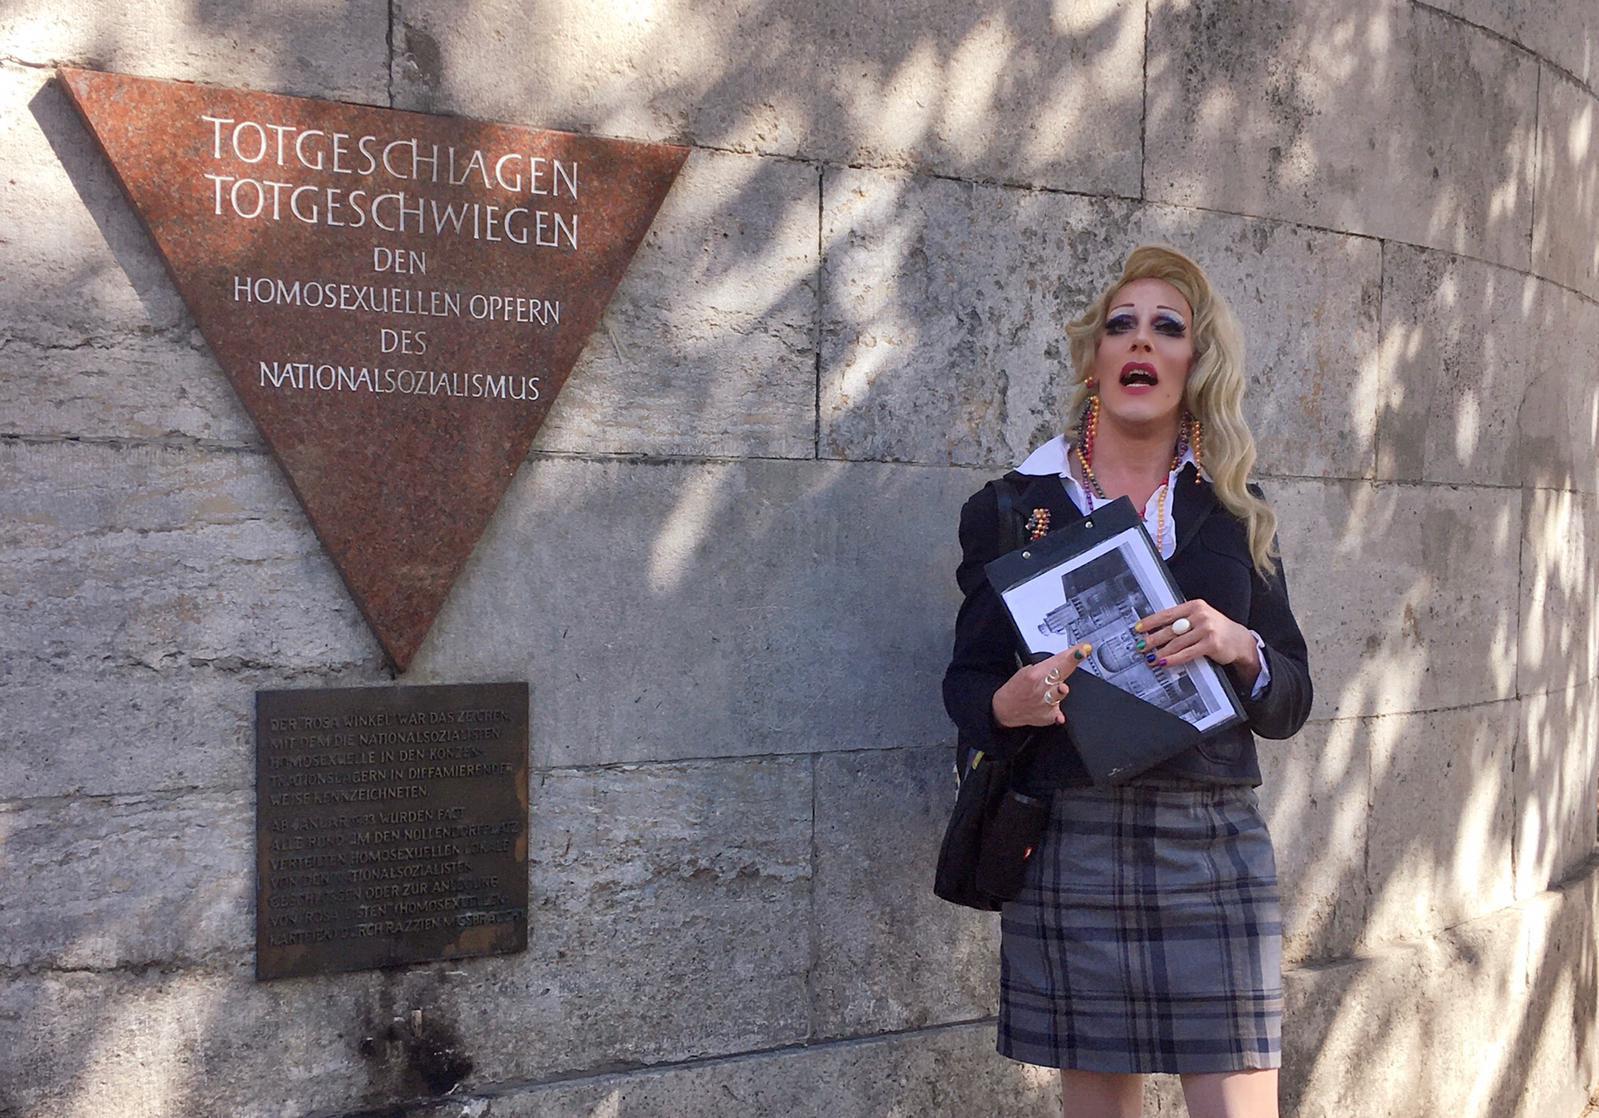 Musical-literary queer city walk with Gaby Tupper